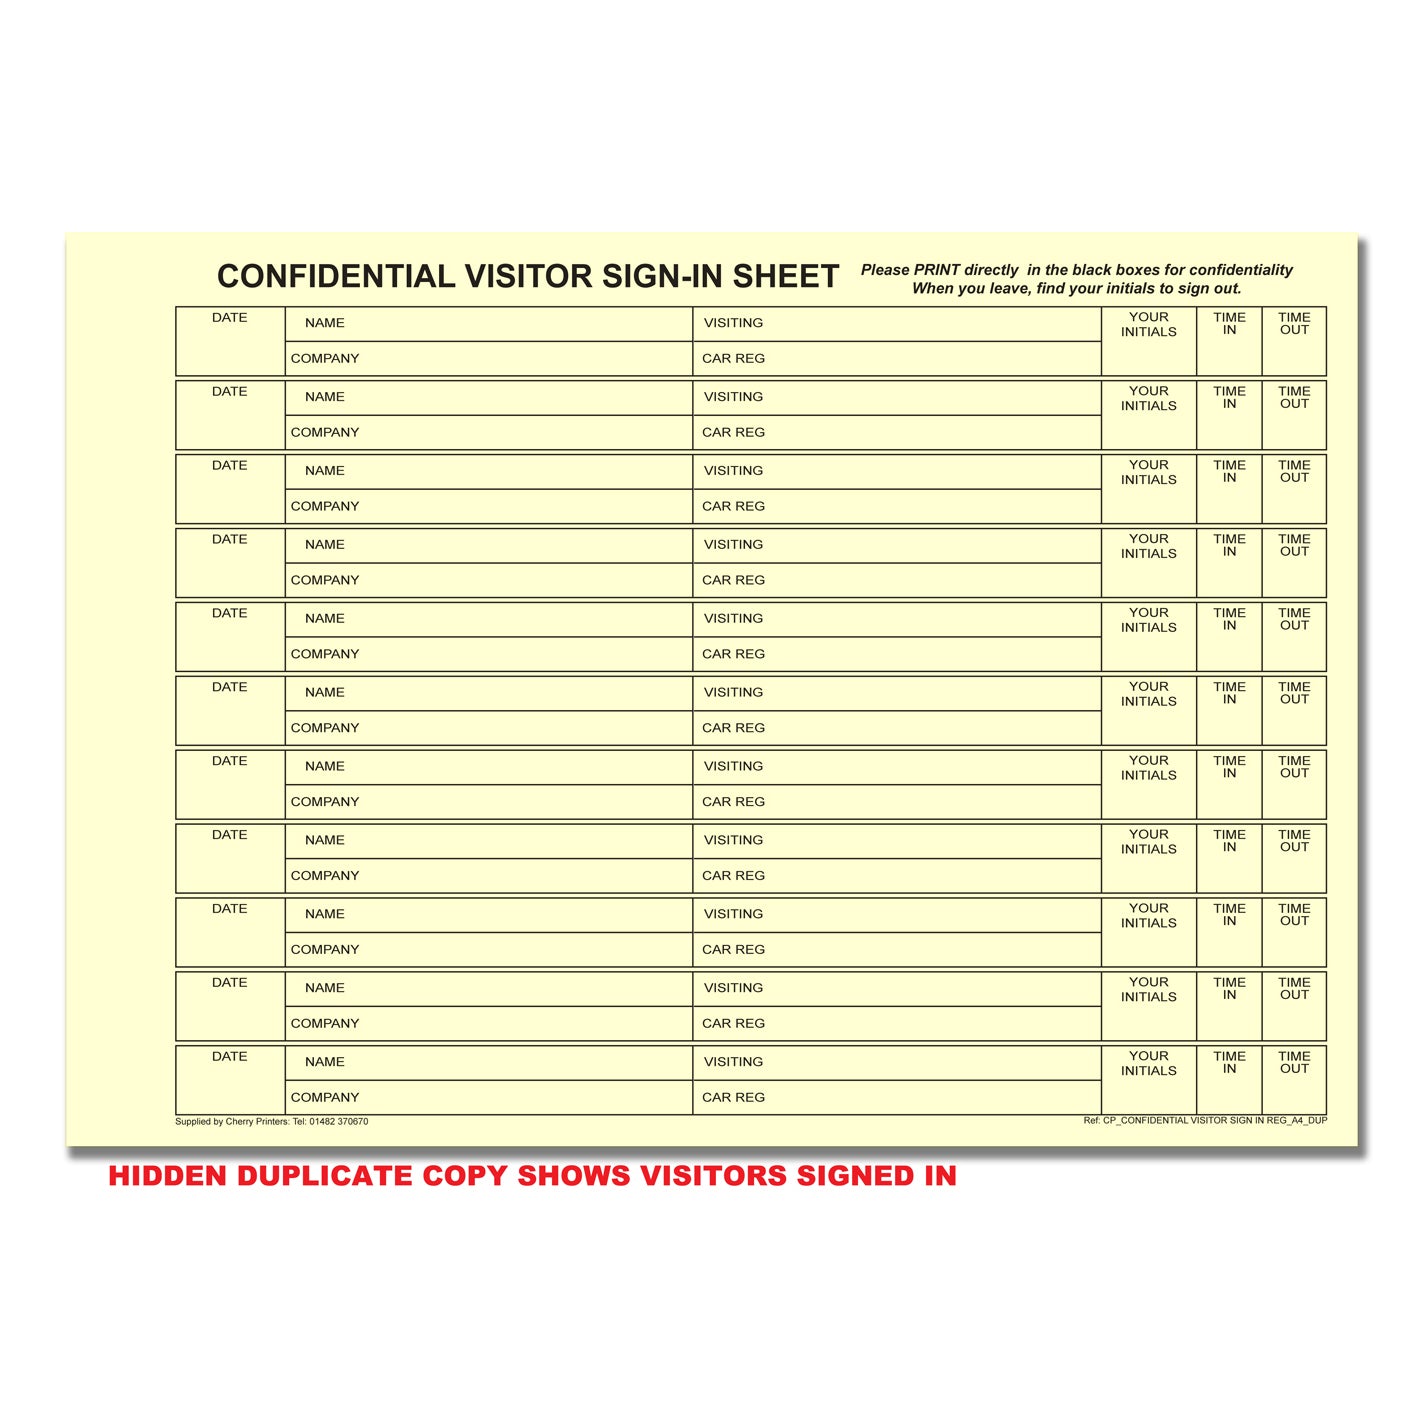 NCR Confidential Visitor Sign In (mit Car Reg) Duplicate Wiro Book A4 GDPR